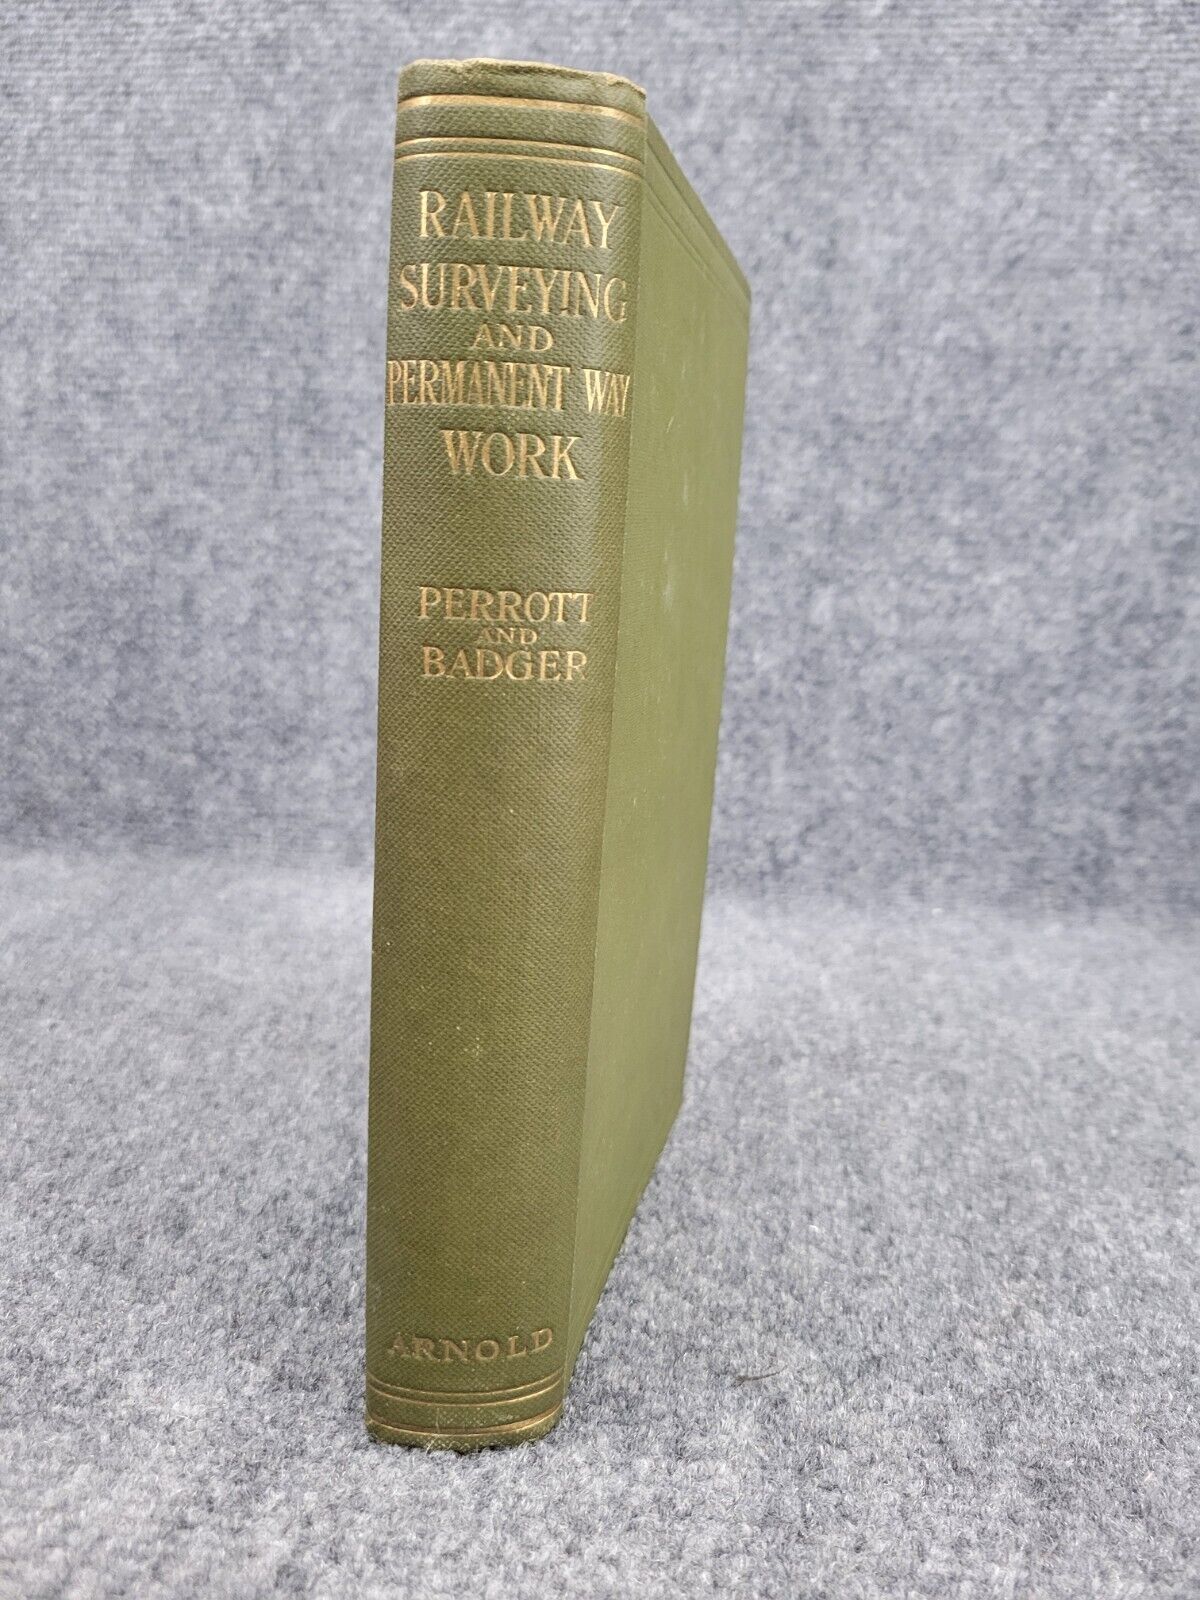 1920 The practice of railway servicing and permanent way work Perrott & Badger